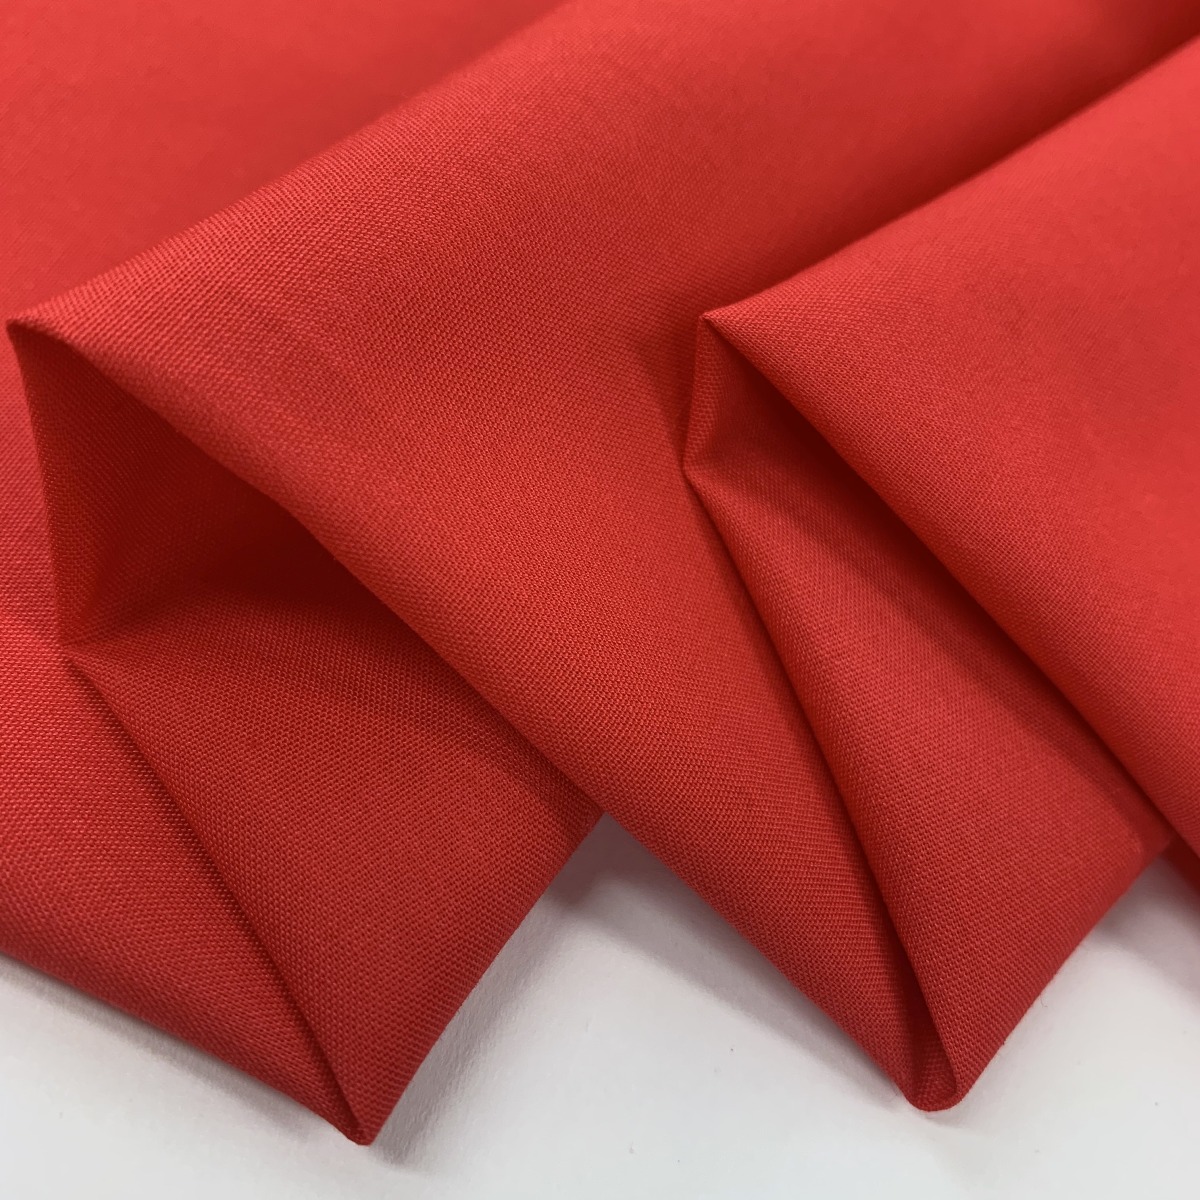 red 65% polyester 35% cotton, lining material, shirting fabric